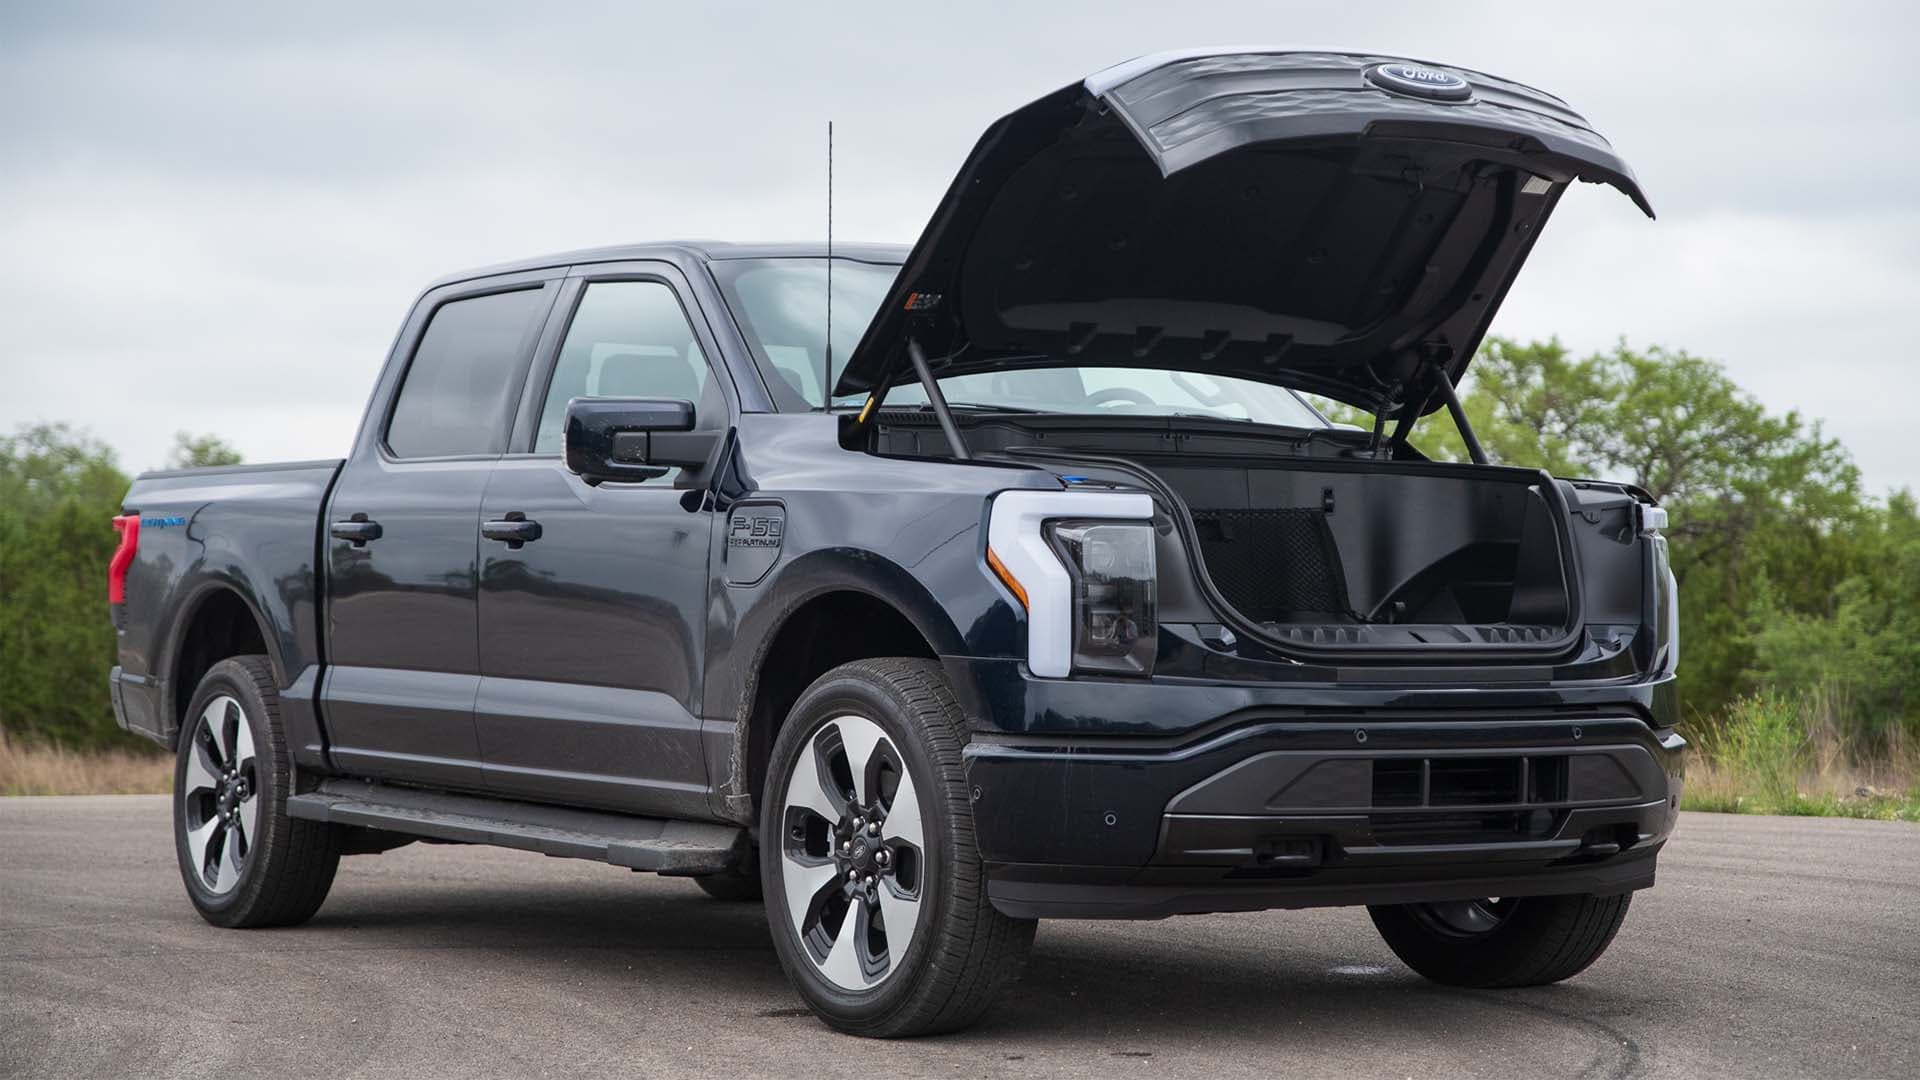 Why the Ford F-150 Lightning Is the Most Important EV to Get Right